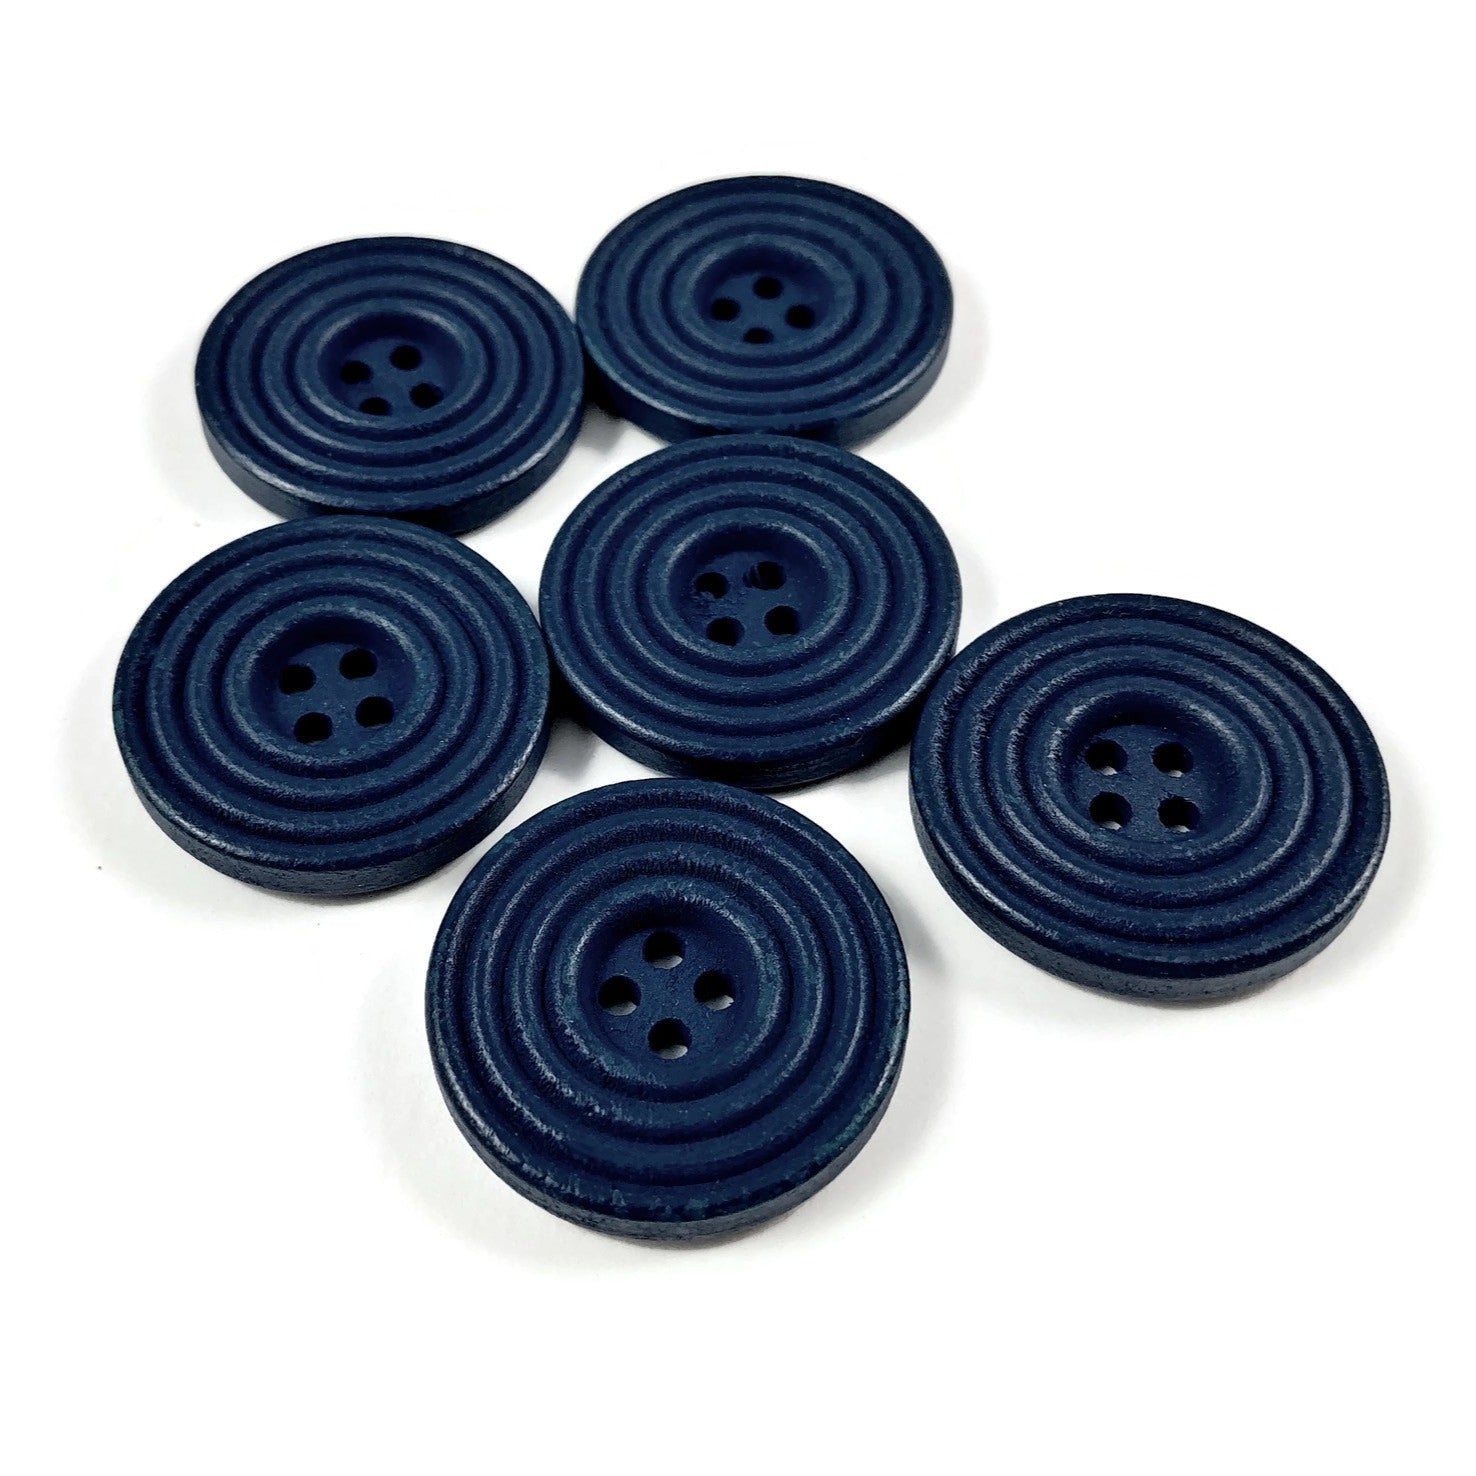  Round Stitch, 25mm, Blue, 6 Recycled Cotton Buttons